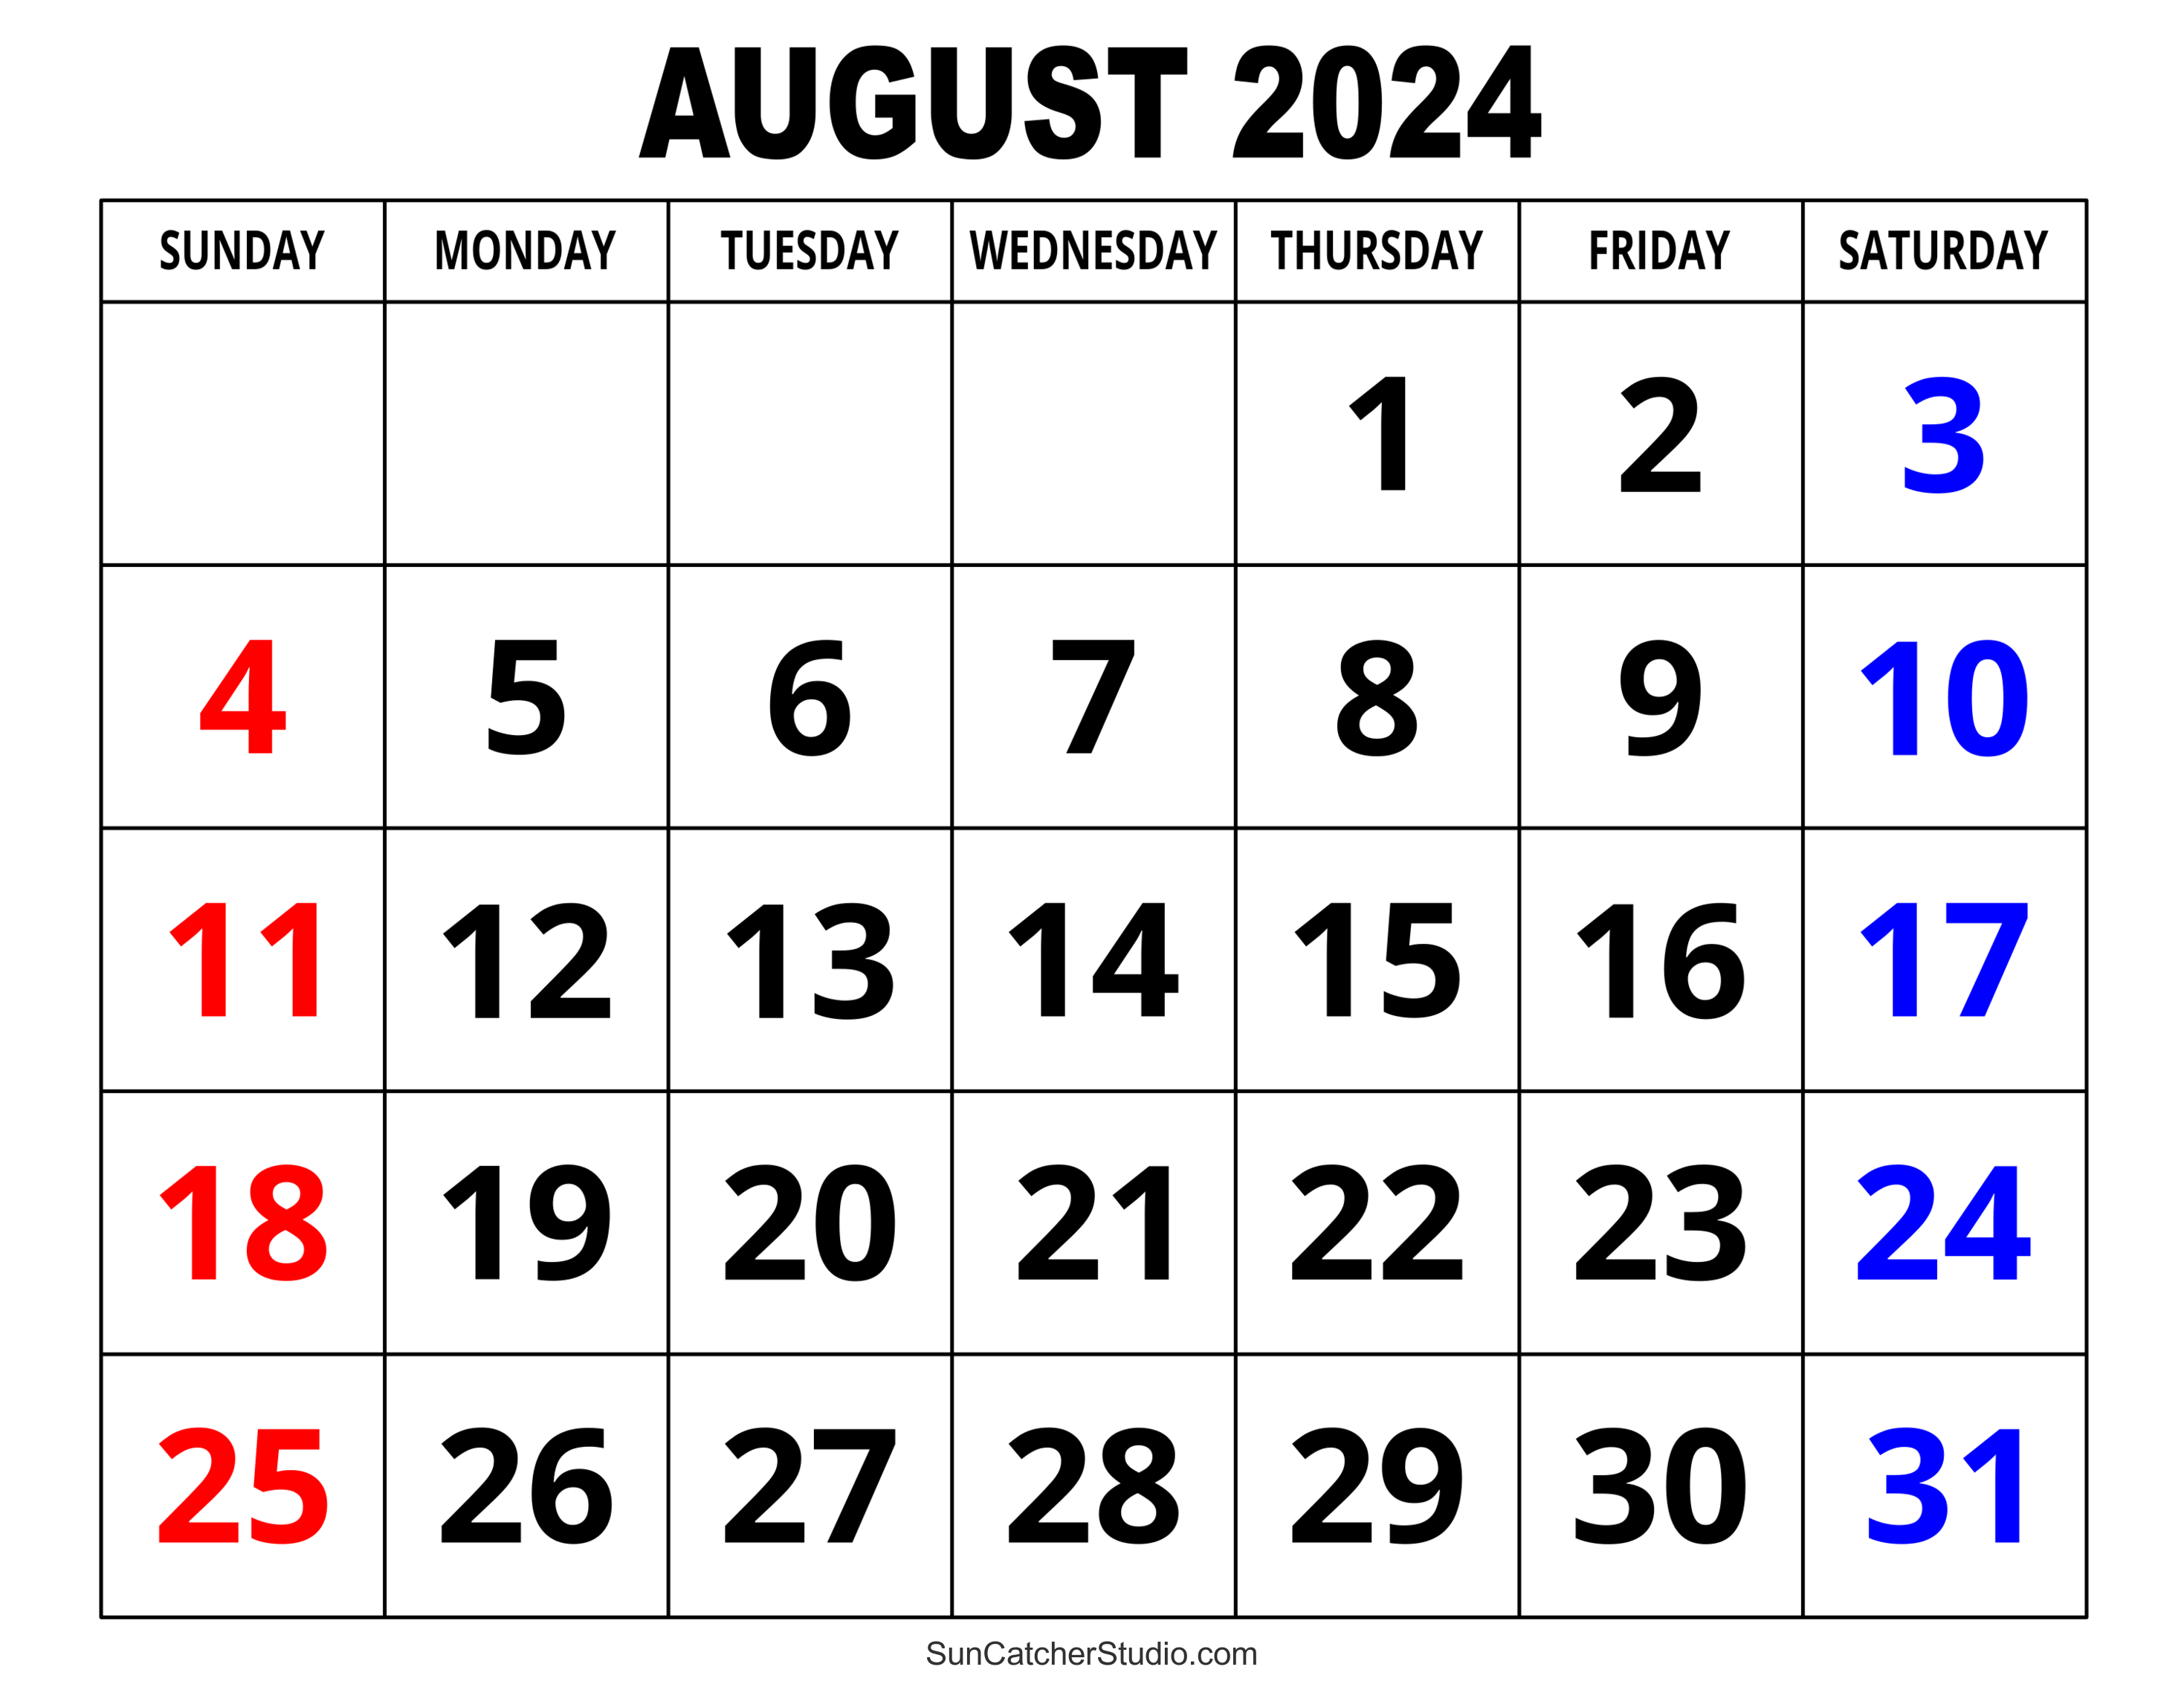 August 2024 Calendar (Free Printable) – Diy Projects, Patterns with Free Printable Calendar 2024 August With Holidays